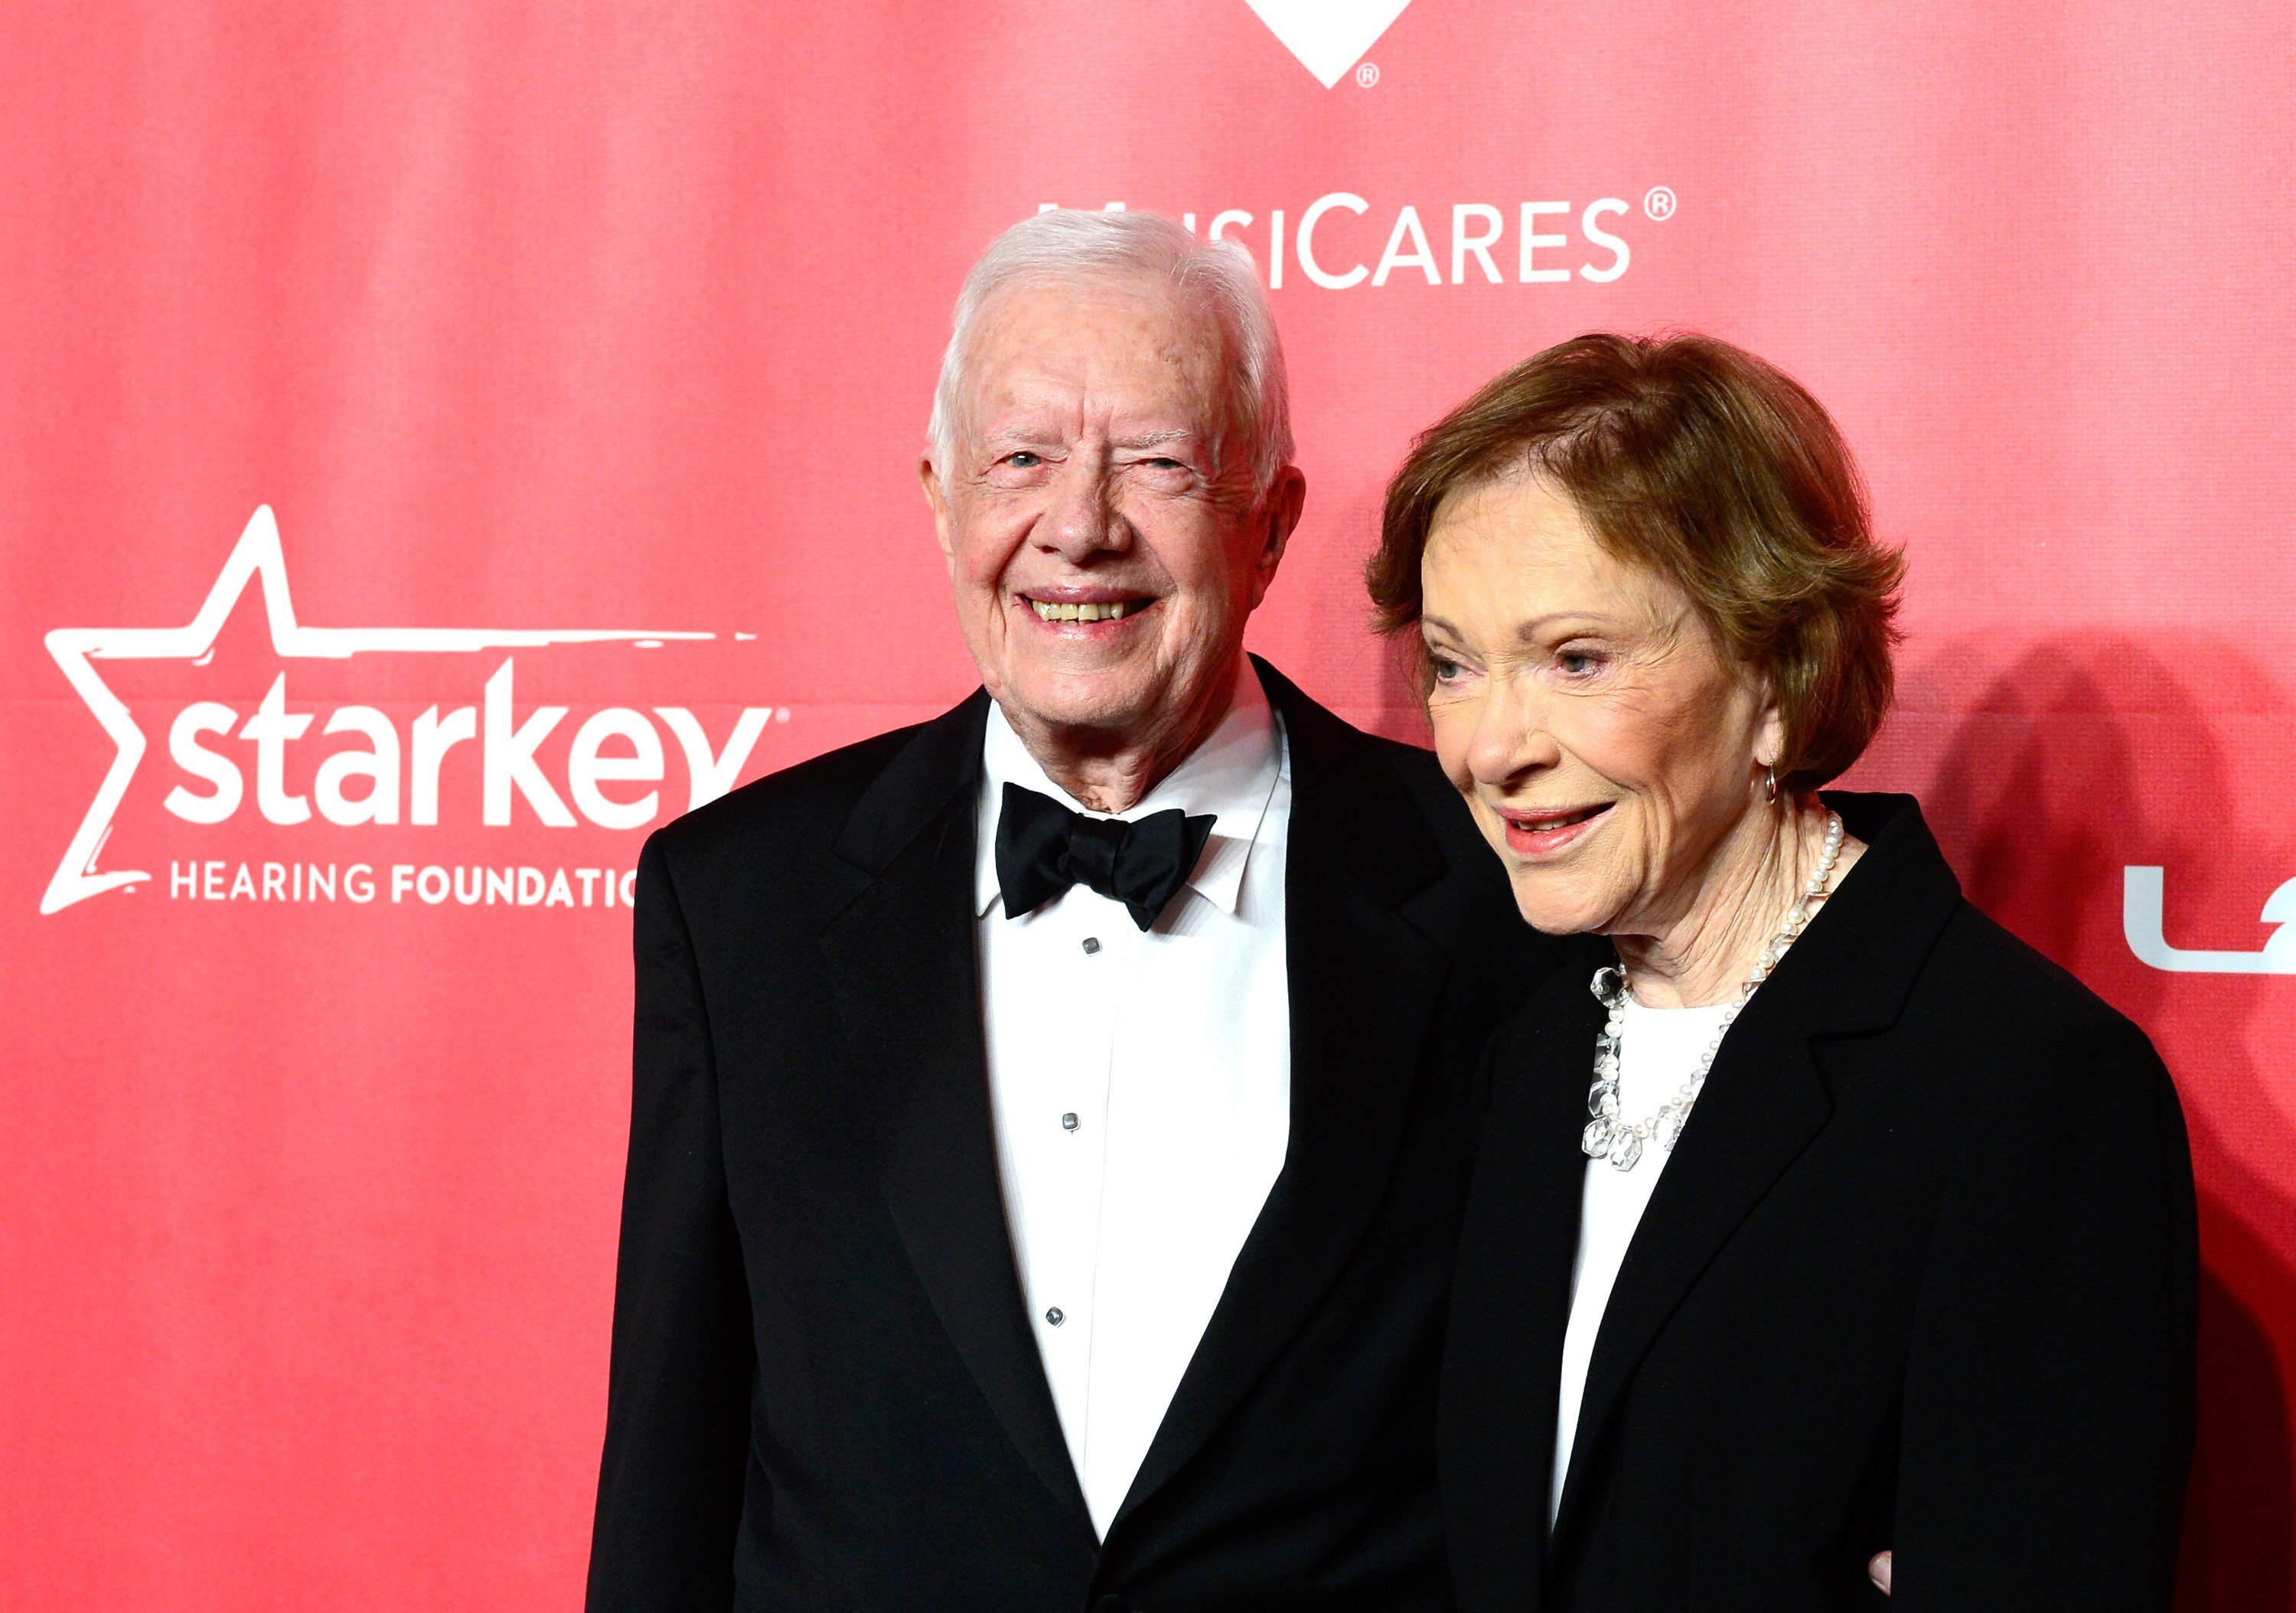 Former US President Jimmy Carter and former First Lady Rosalynn Carter at the 25th anniversary of MusiCares Person Of The Year Gala honoring Bob Dylan at the Los Angeles Convention Center on February 6, 2015 in California | Photo: Getty Images